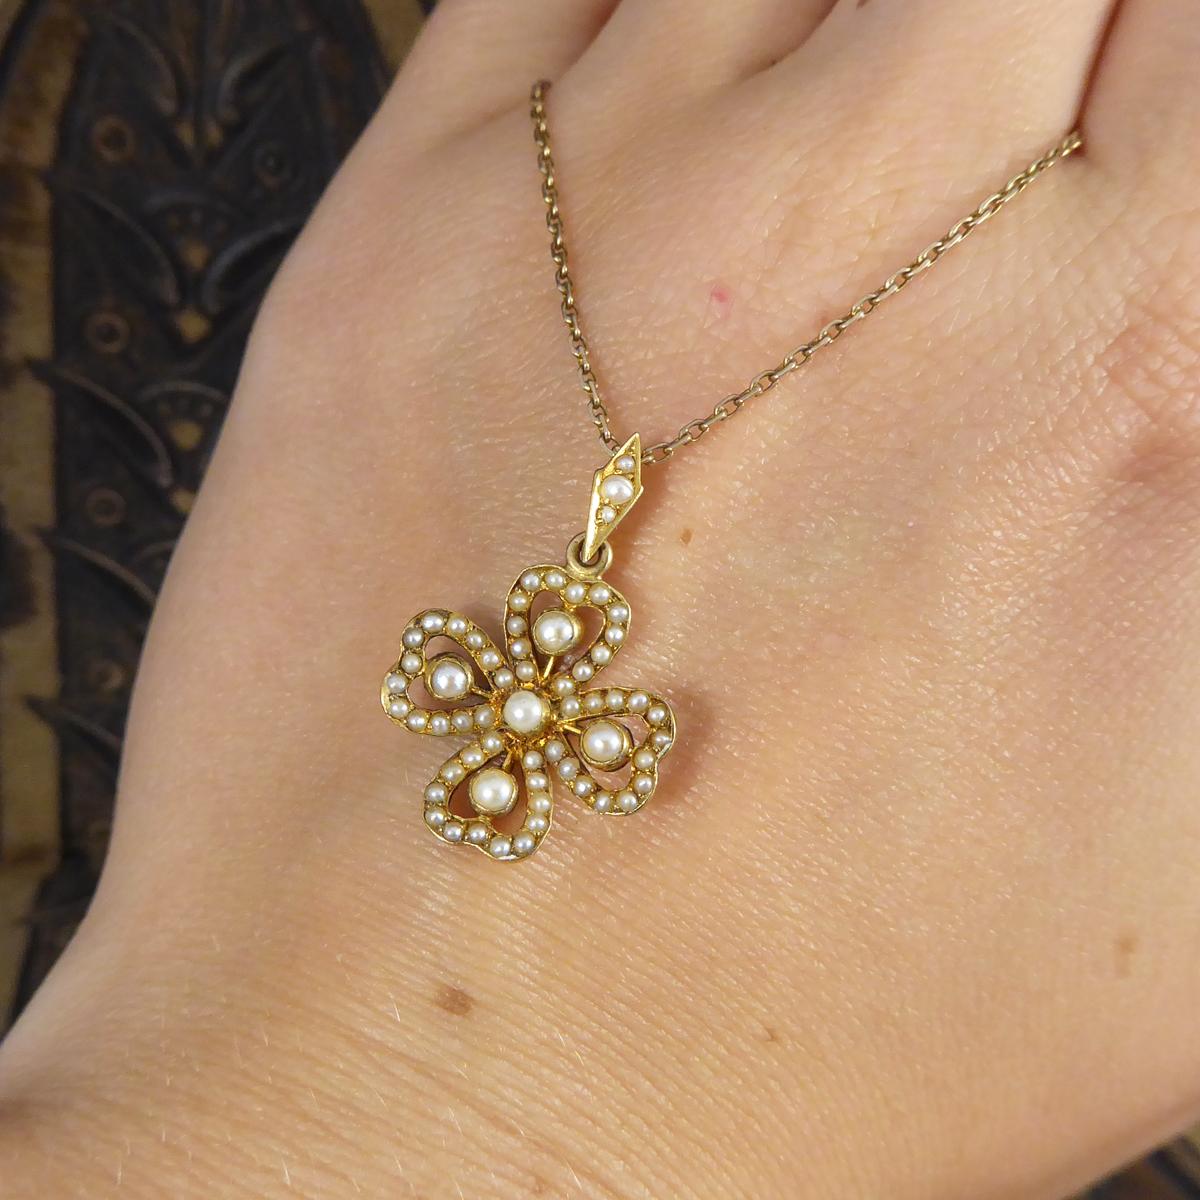 Edwardian Seed Pearl Clover 15 Carat Gold Pendant on 9 Carat Gold Chain 3